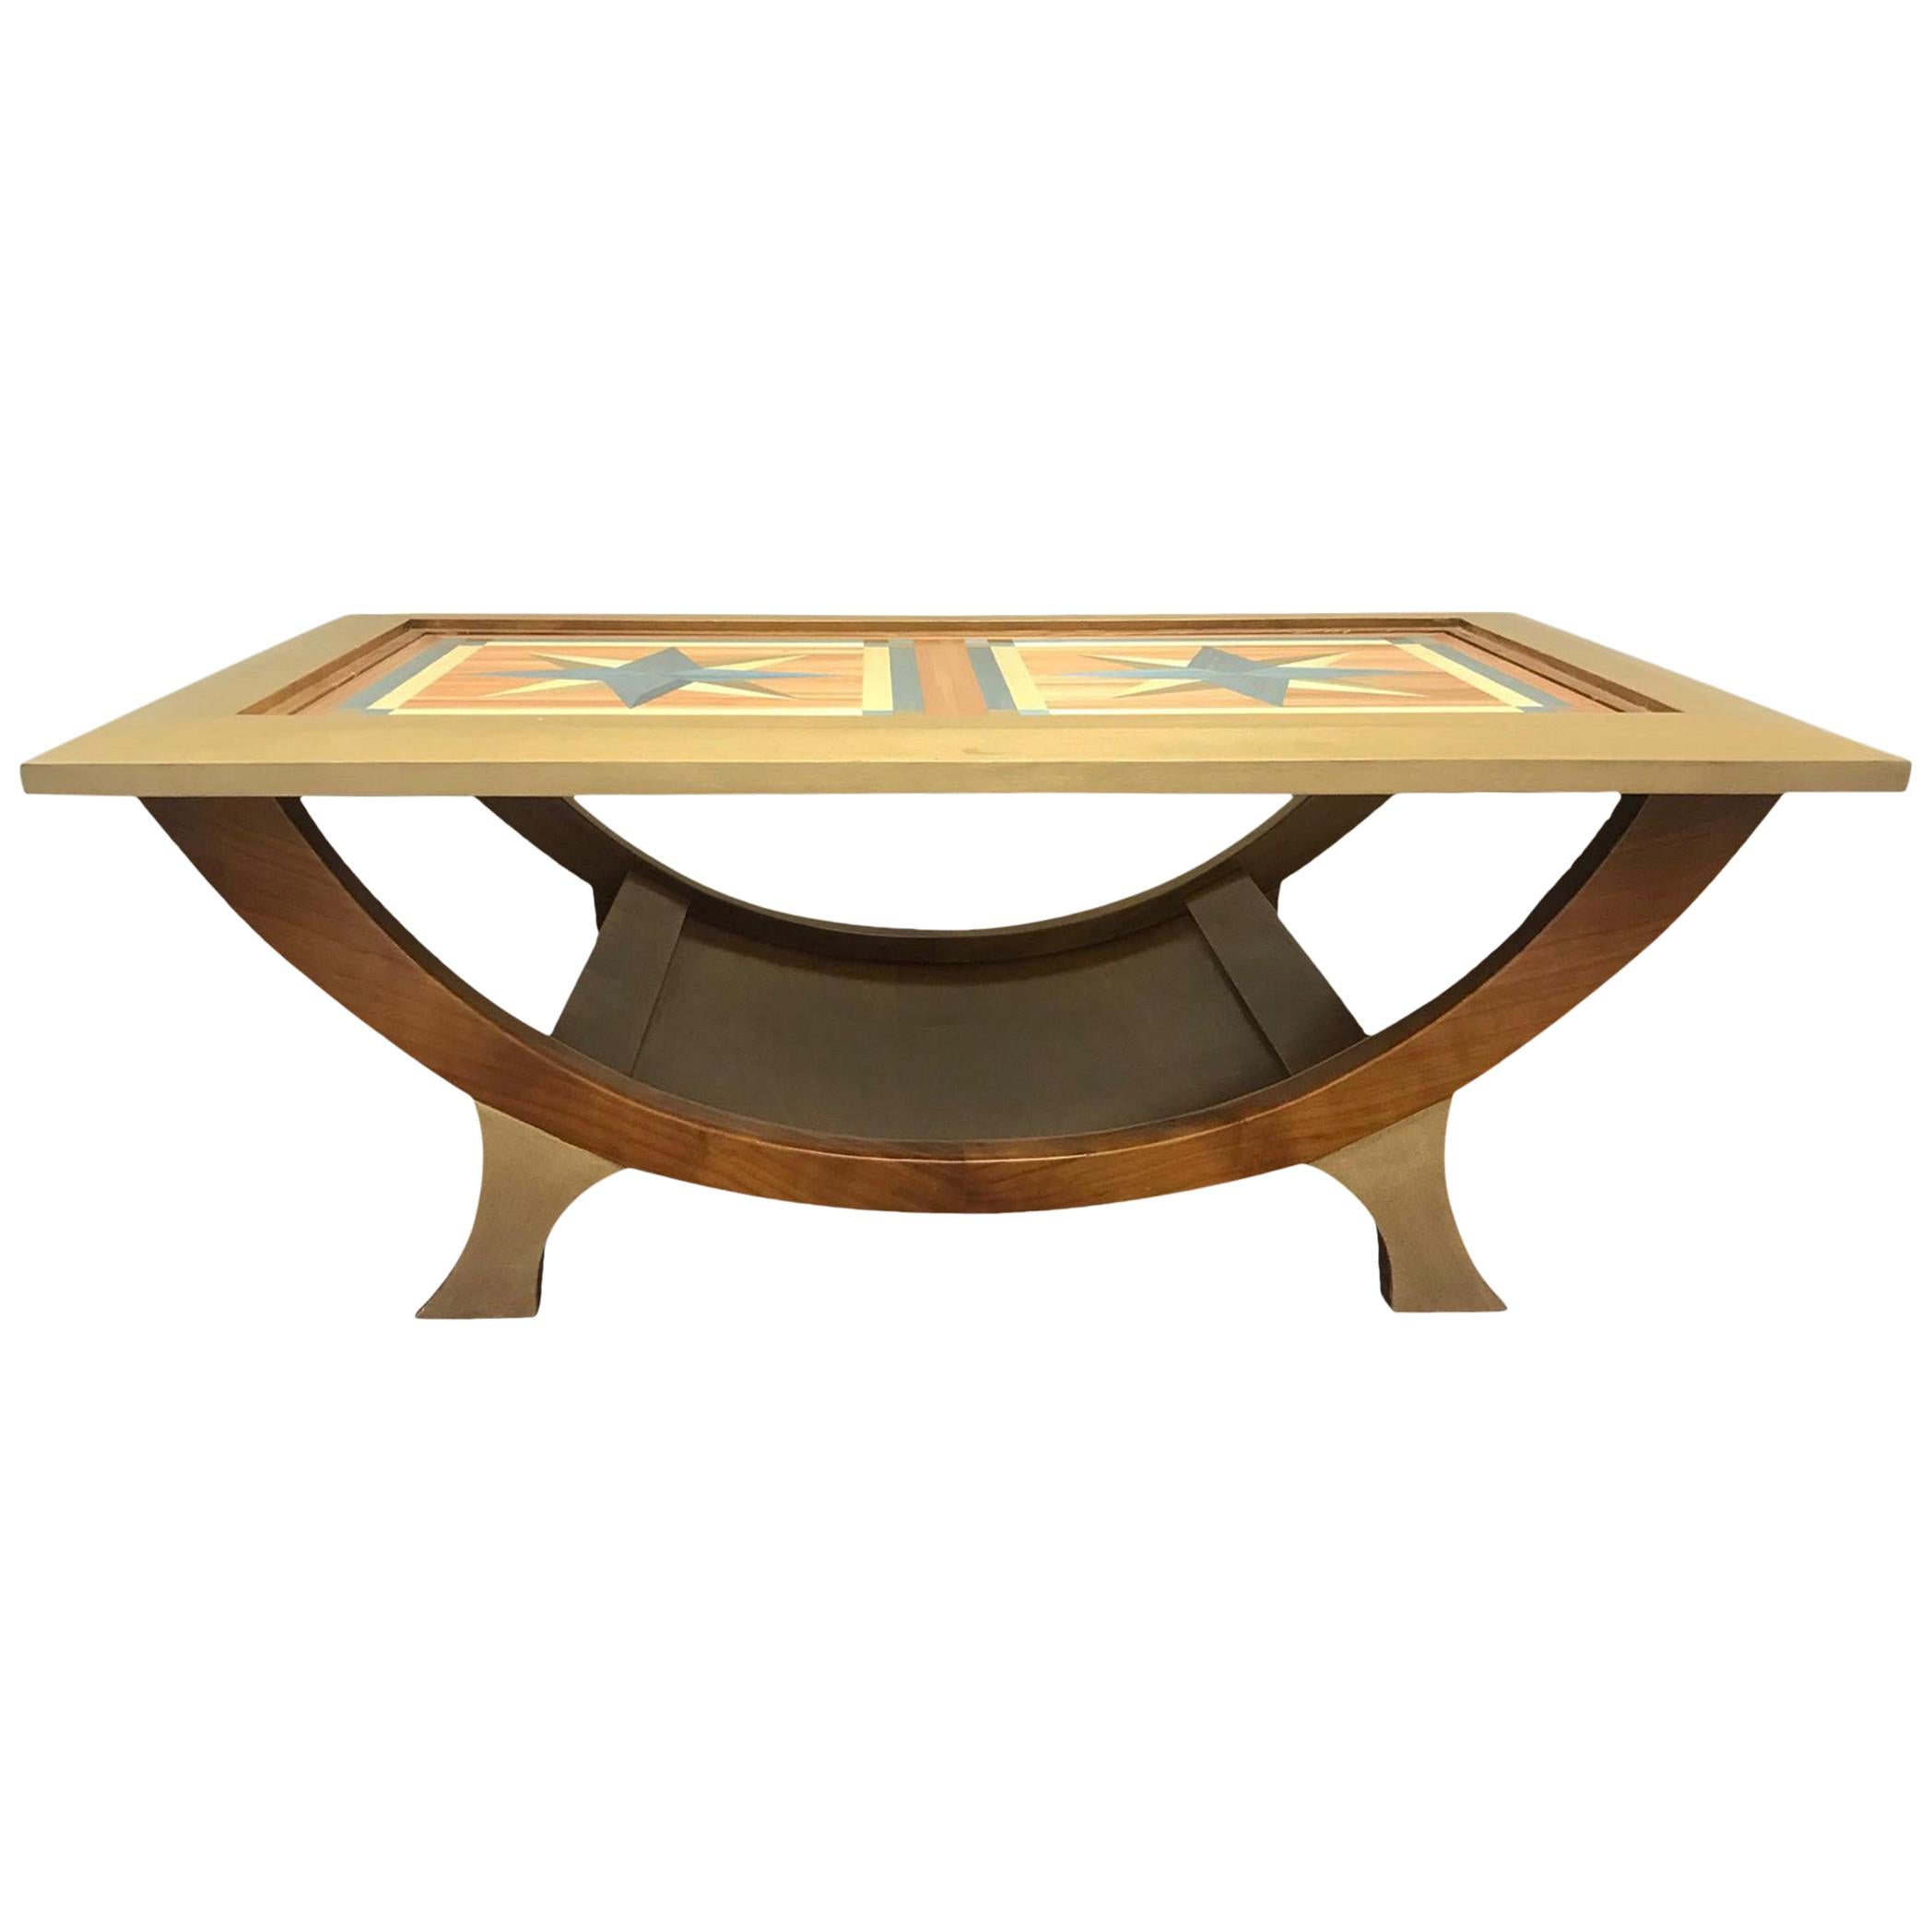 1960s Danish Modern Style Inlay Coffee Table For Sale